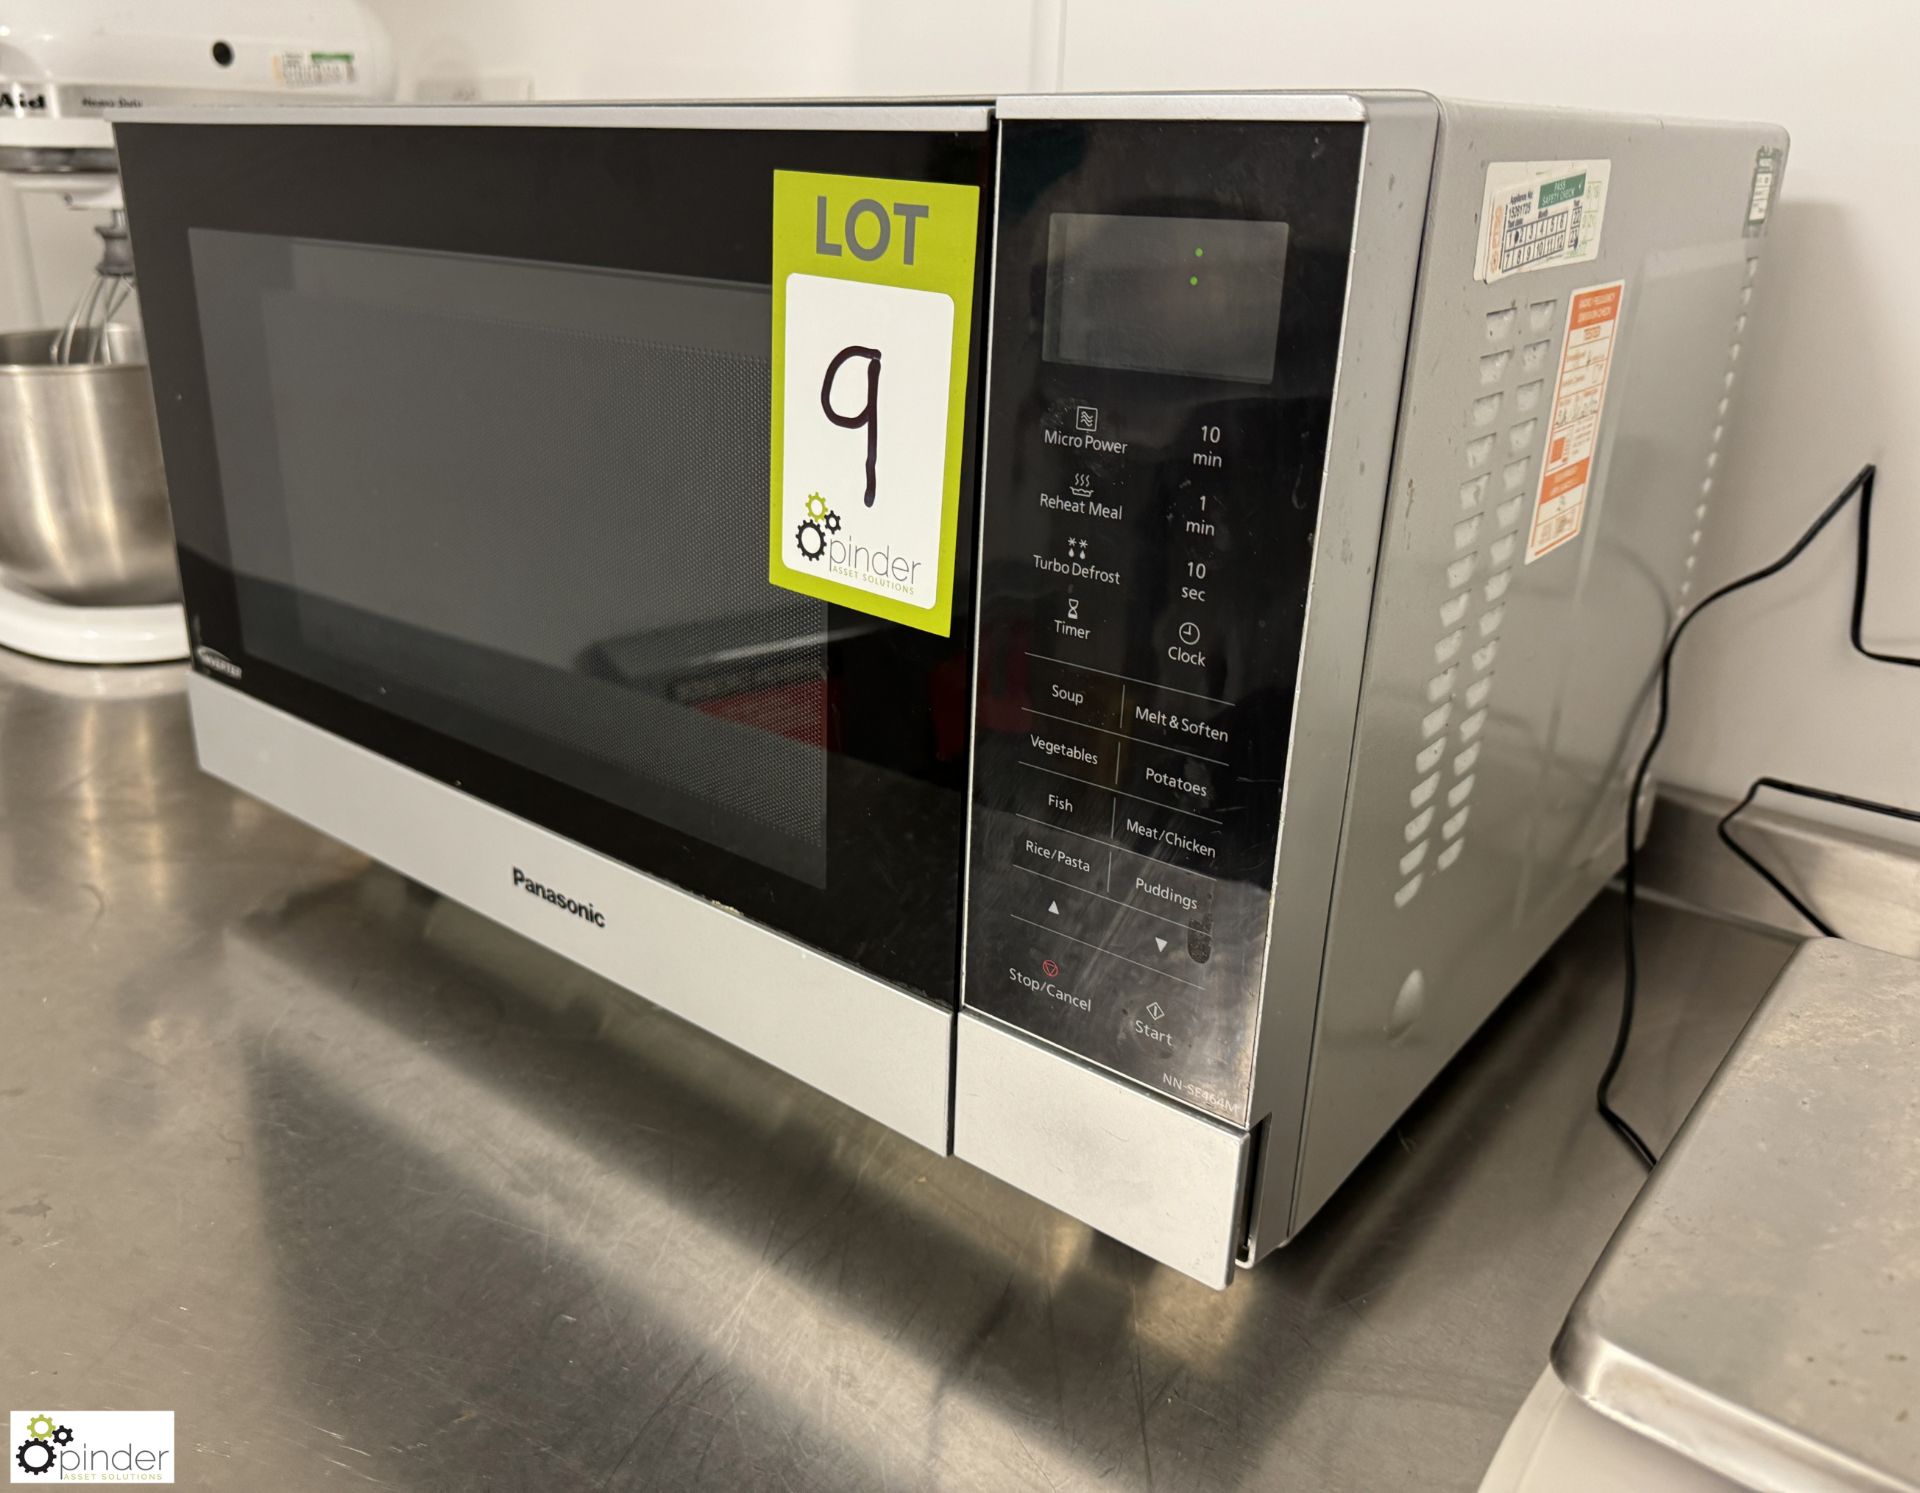 Panasonic NN-SF464M Microwave Oven, 240volts (location in building – basement kitchen 1) - Image 2 of 4